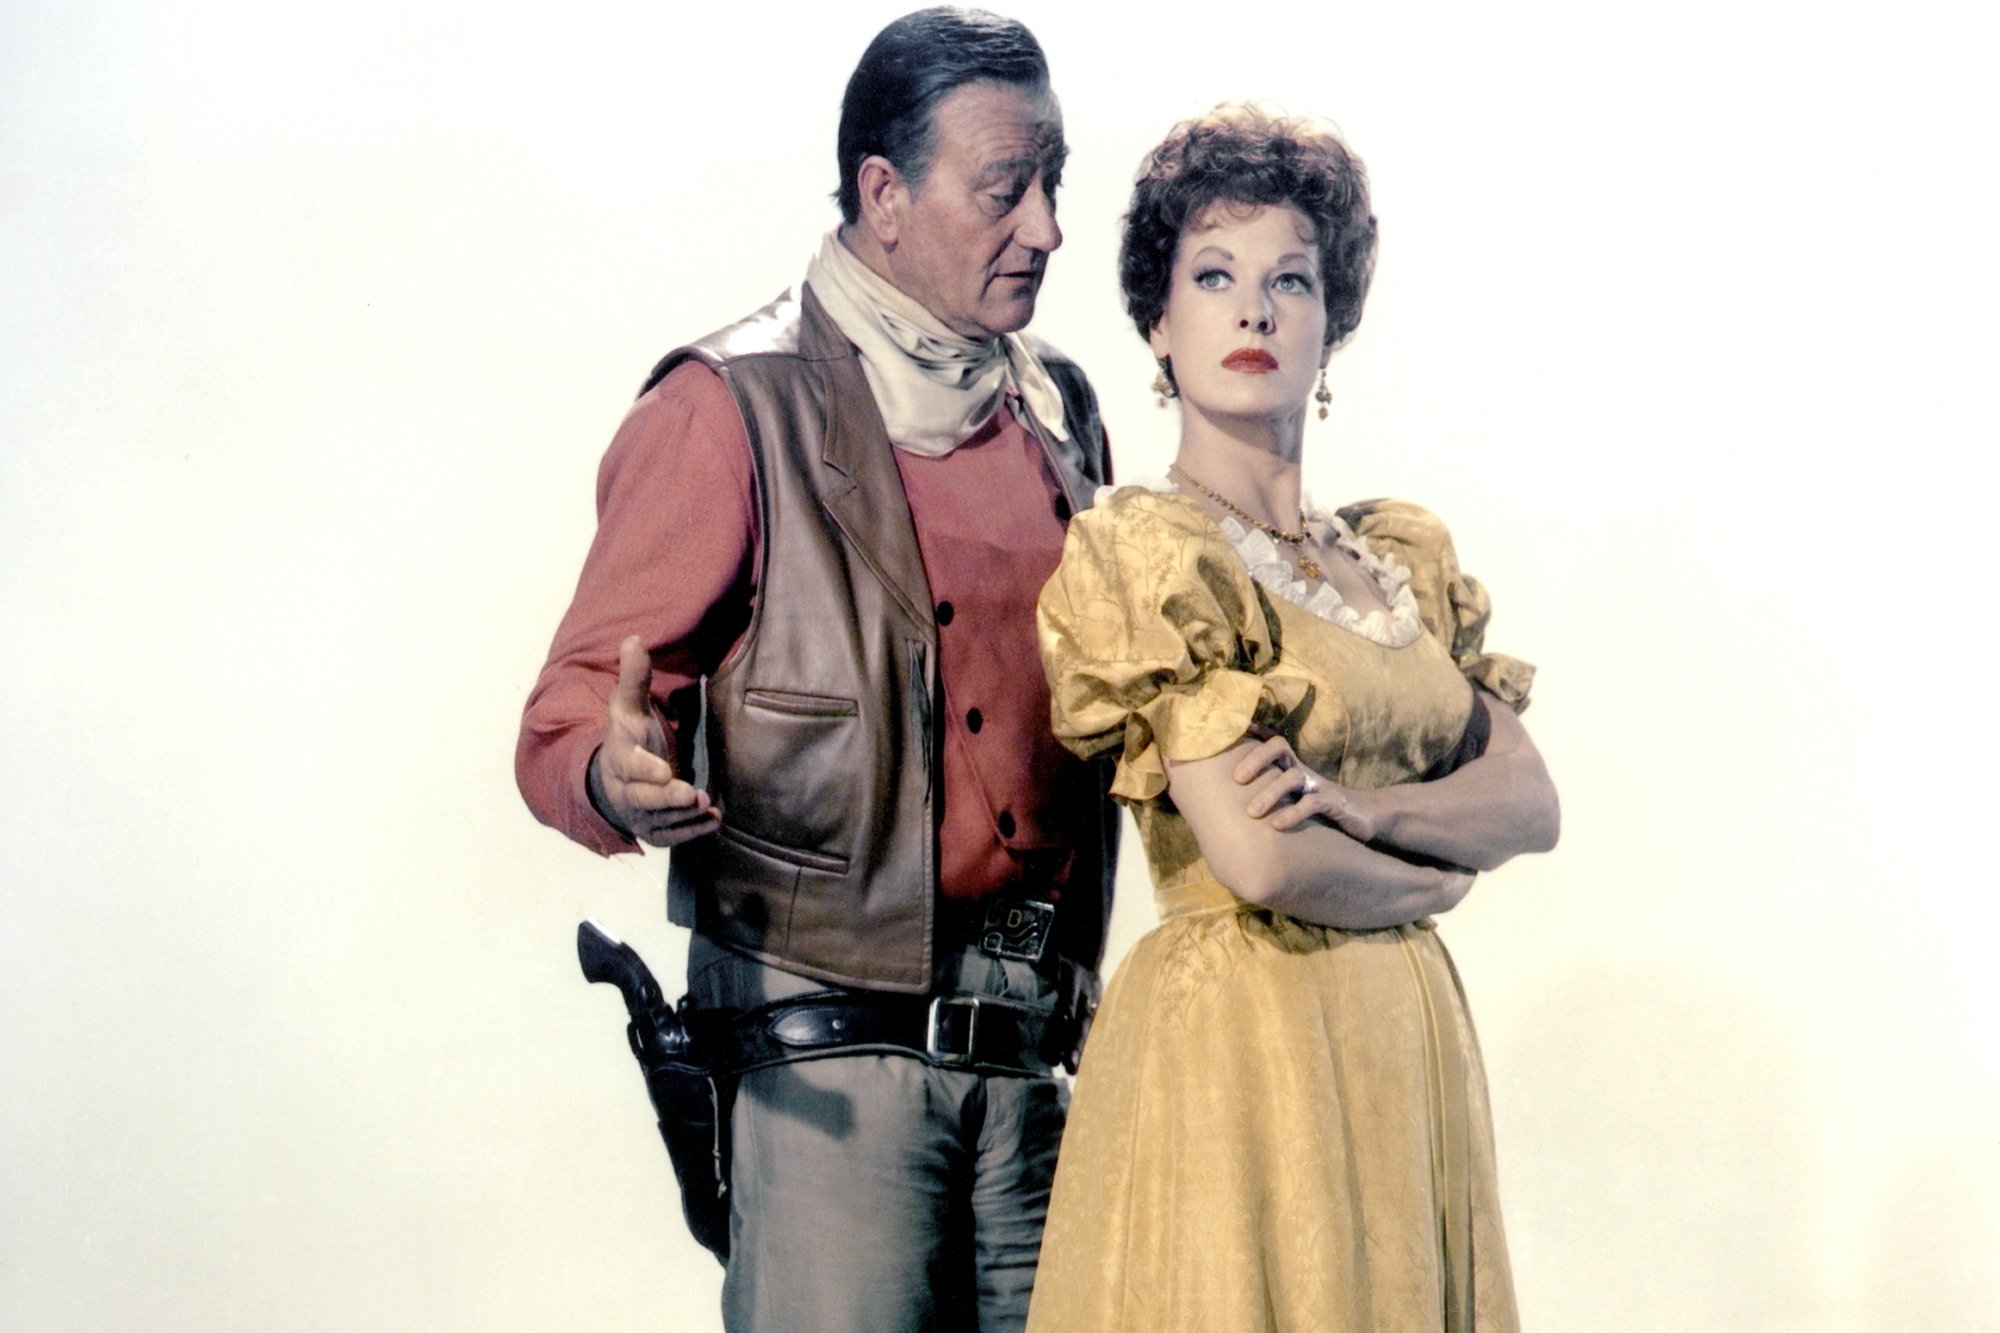 'McLintock!' actors John Wayne and Maureen O'Hara in Western costumes for a promo shoot. He's standing next to her talking, while she has her arms crossed looking away from him.